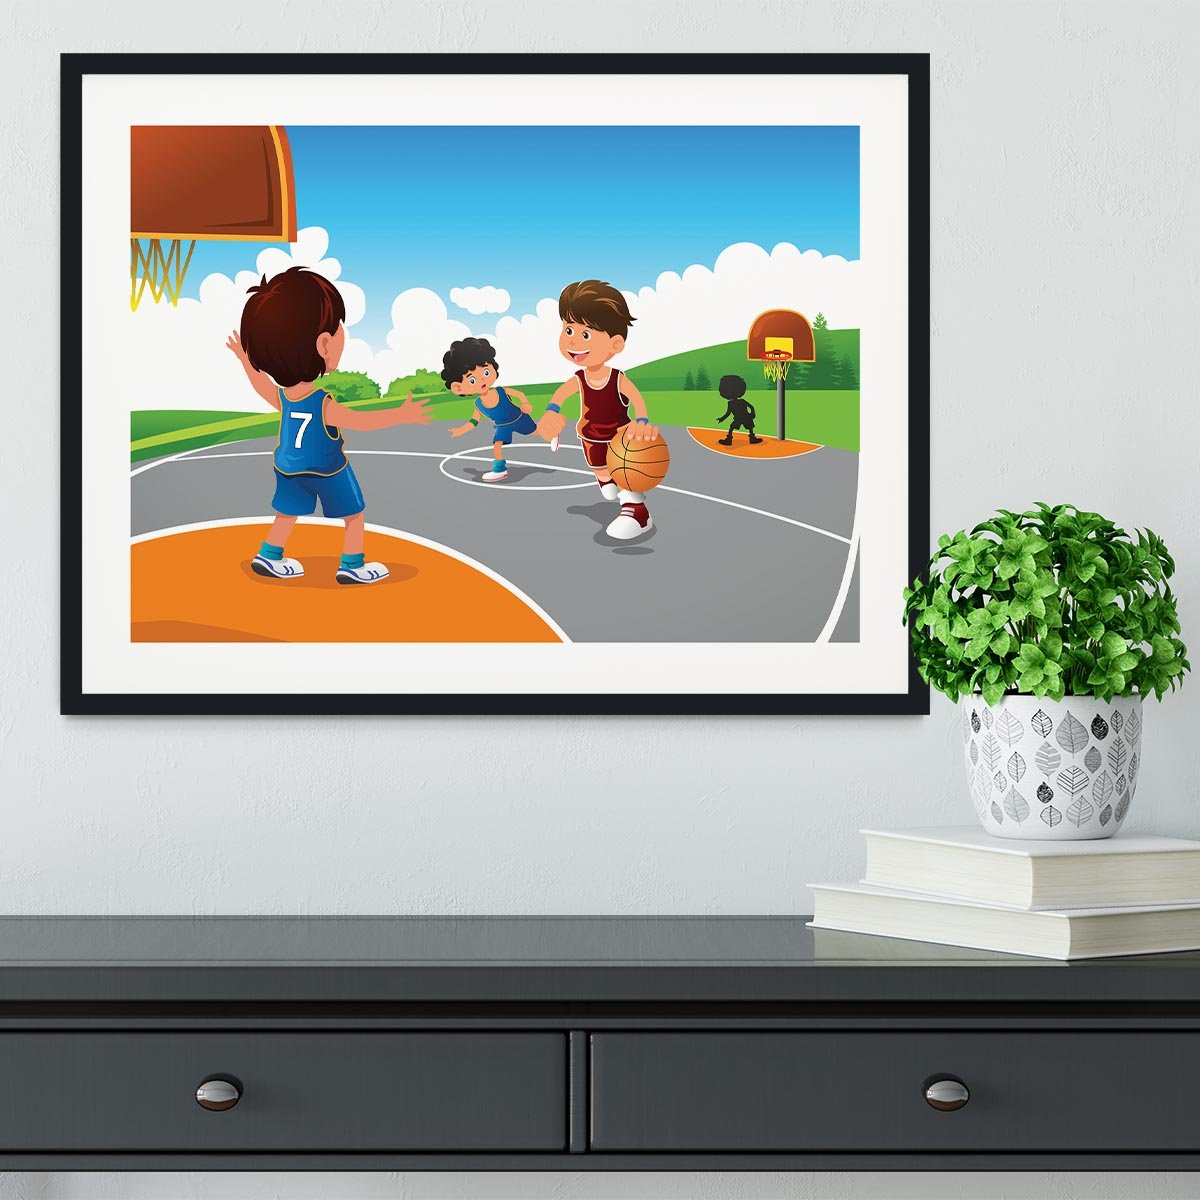 Kids playing basketball in a playground Framed Print - Canvas Art Rocks - 1